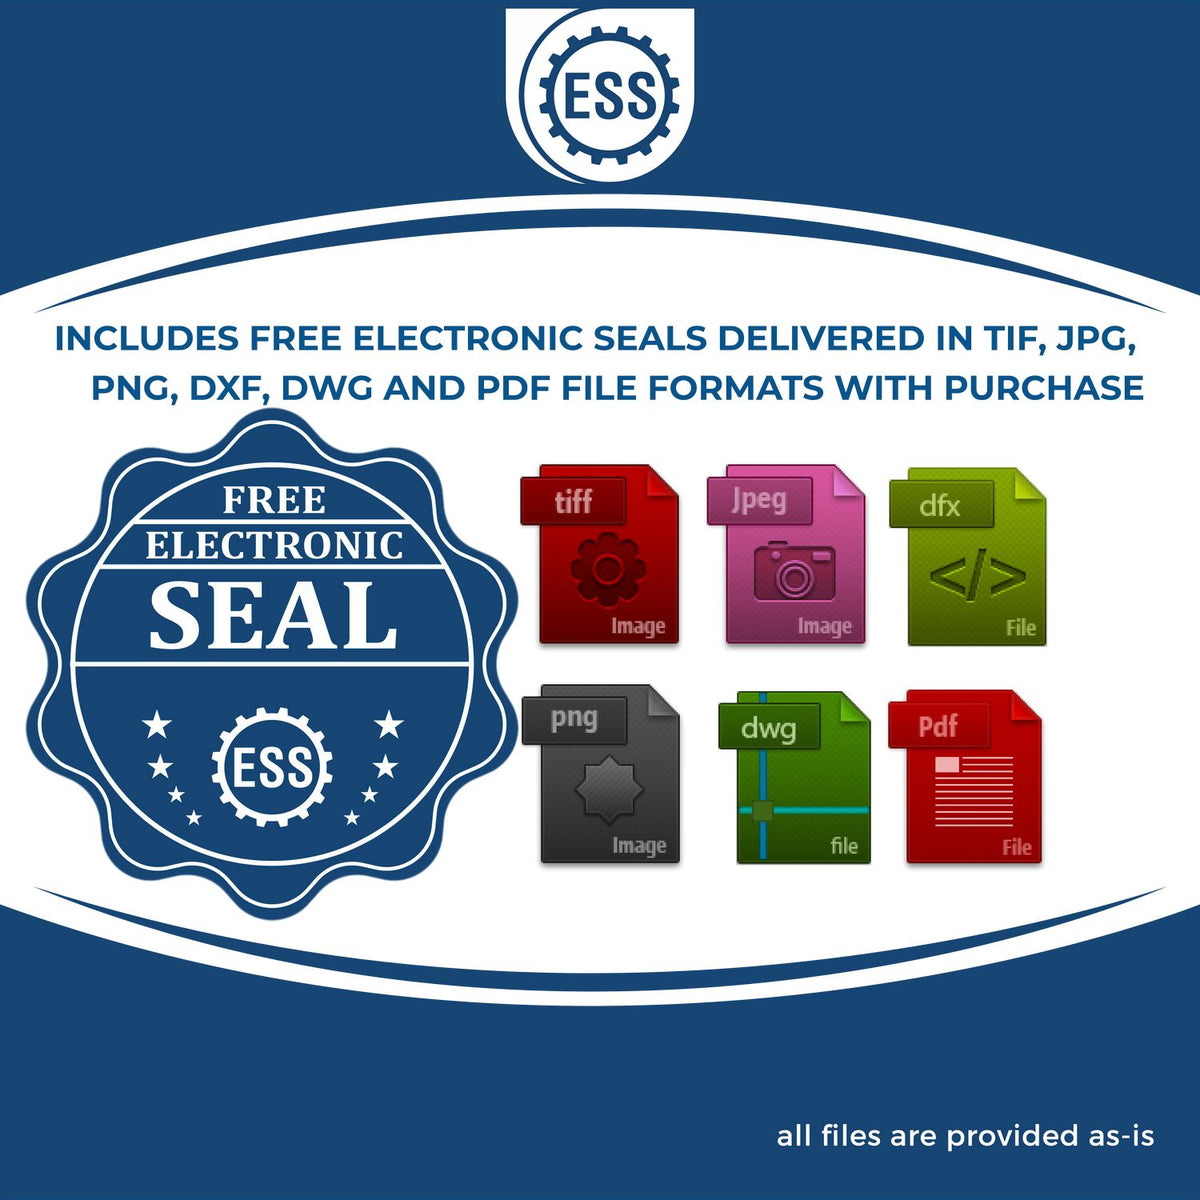 An infographic for the free electronic seal for the Soft Maine Professional Geologist Seal illustrating the different file type icons such as DXF, DWG, TIF, JPG and PNG.